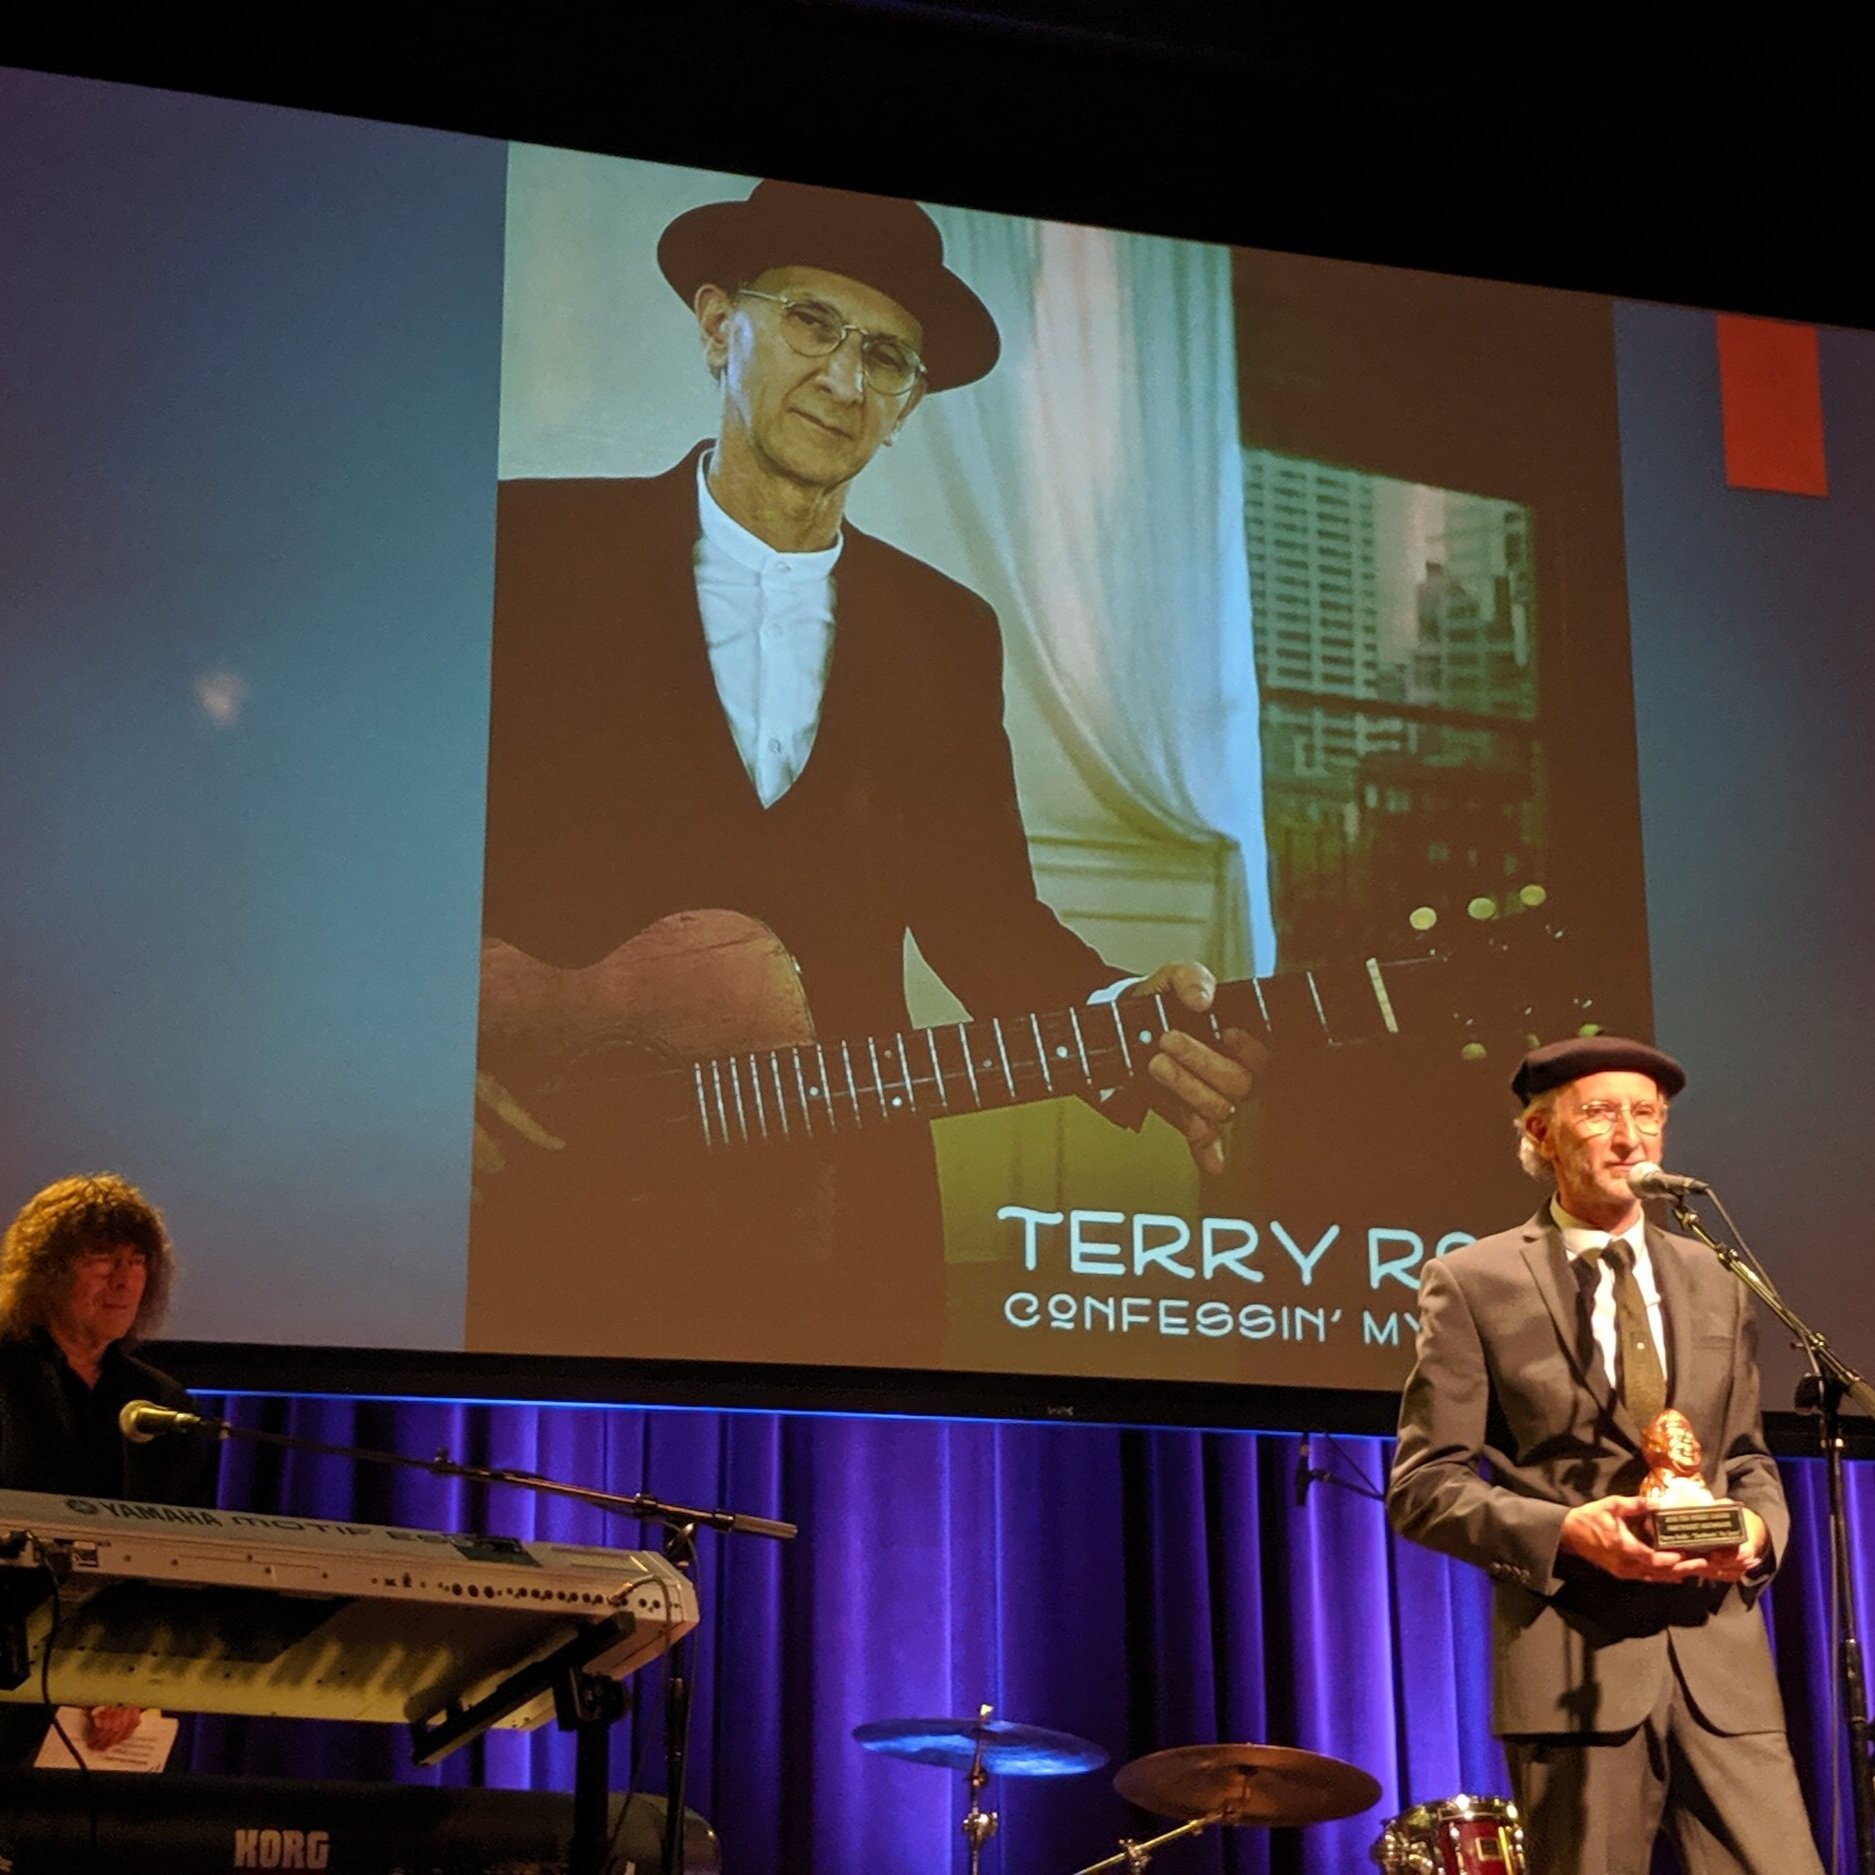 Terry accepting Northwest Recording of the Year